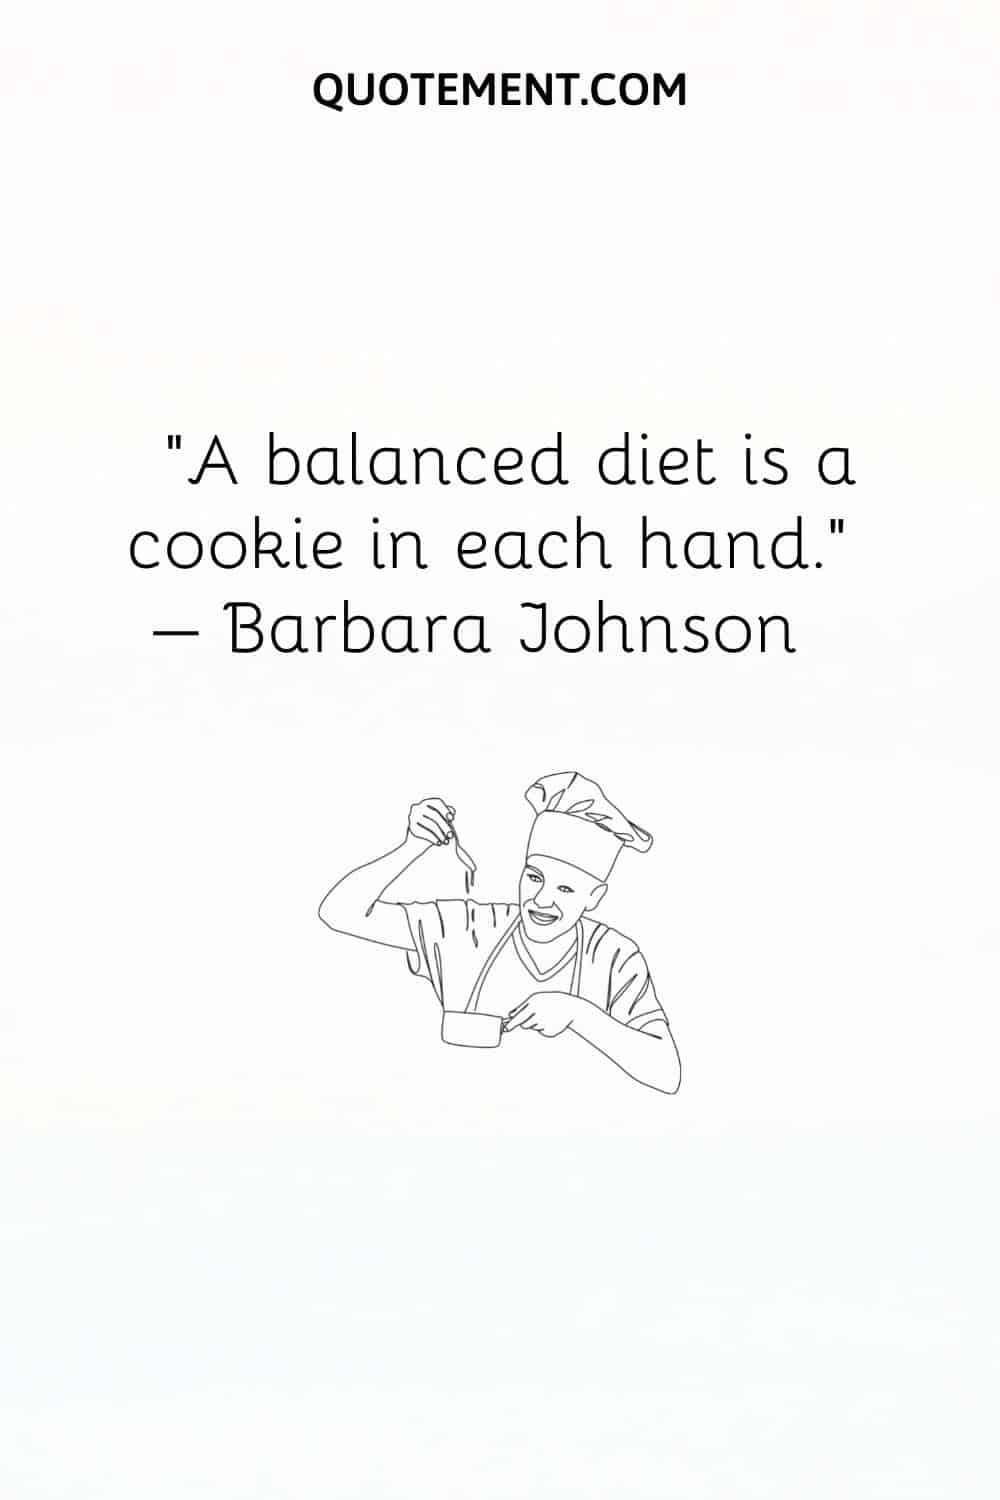 A balanced diet is a cookie in each hand